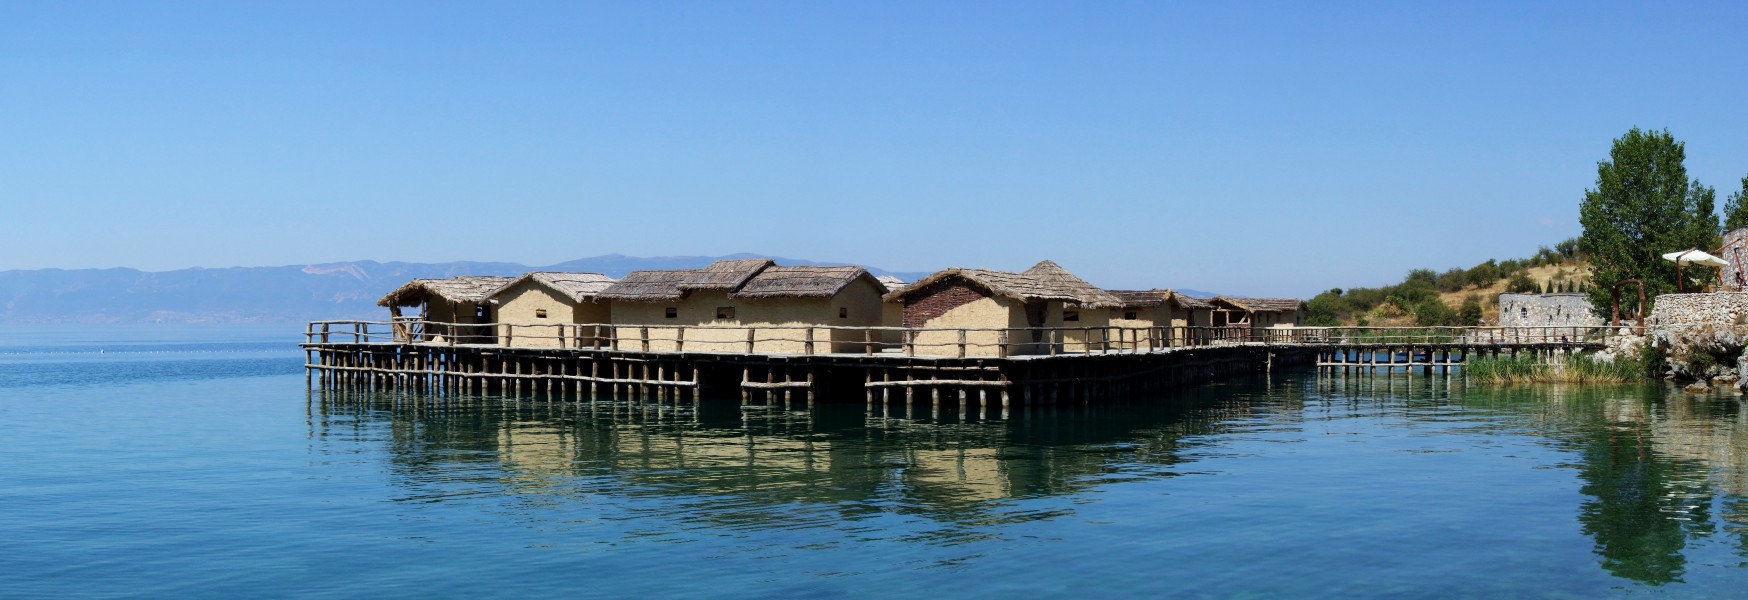 Museum on Water, Ohrid